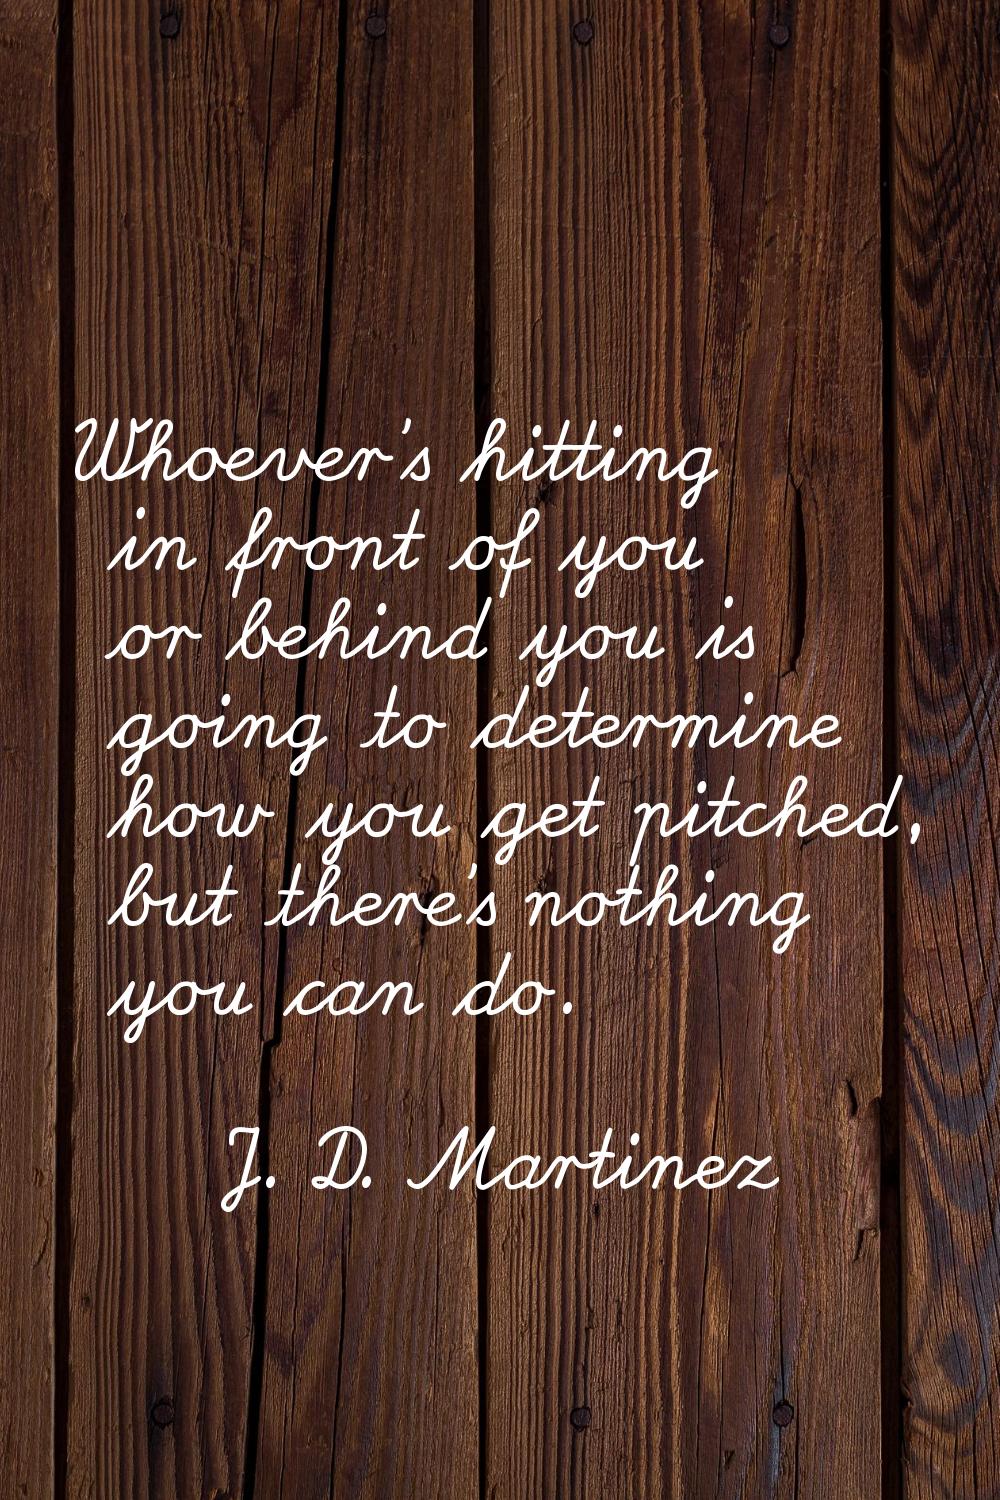 Whoever's hitting in front of you or behind you is going to determine how you get pitched, but ther